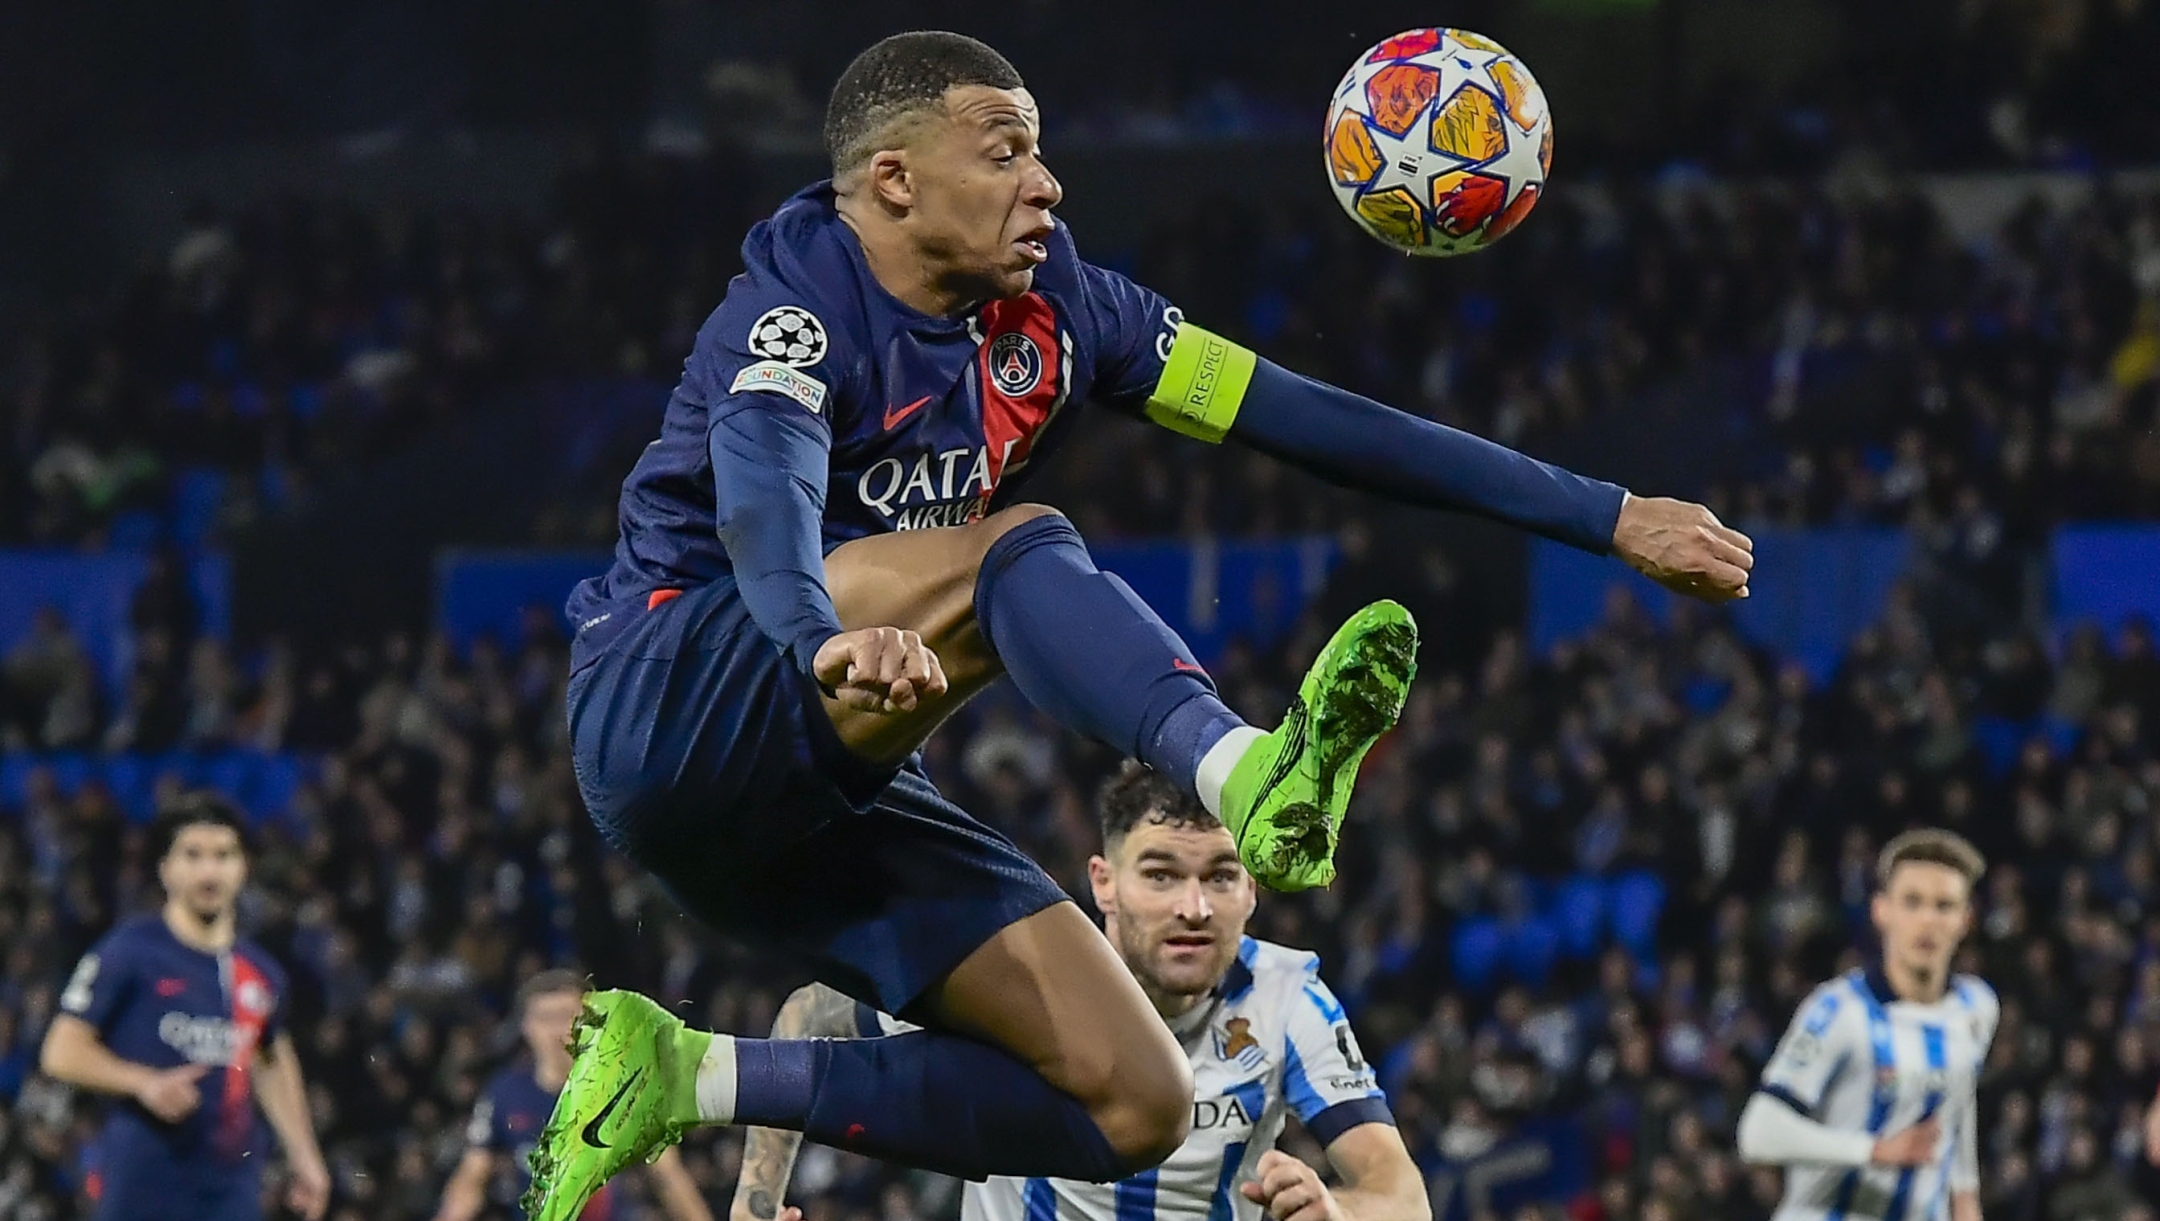 PSG's Kylian Mbappe kicks the ball during the Champions League round of 16 second leg soccer match between Real Sociedad and Paris Saint-Germain, at the Reala Arena stadium in San Sebastian, Spain, Tuesday, March 5, 2024. (AP Photo/Alvaro Barrientos)